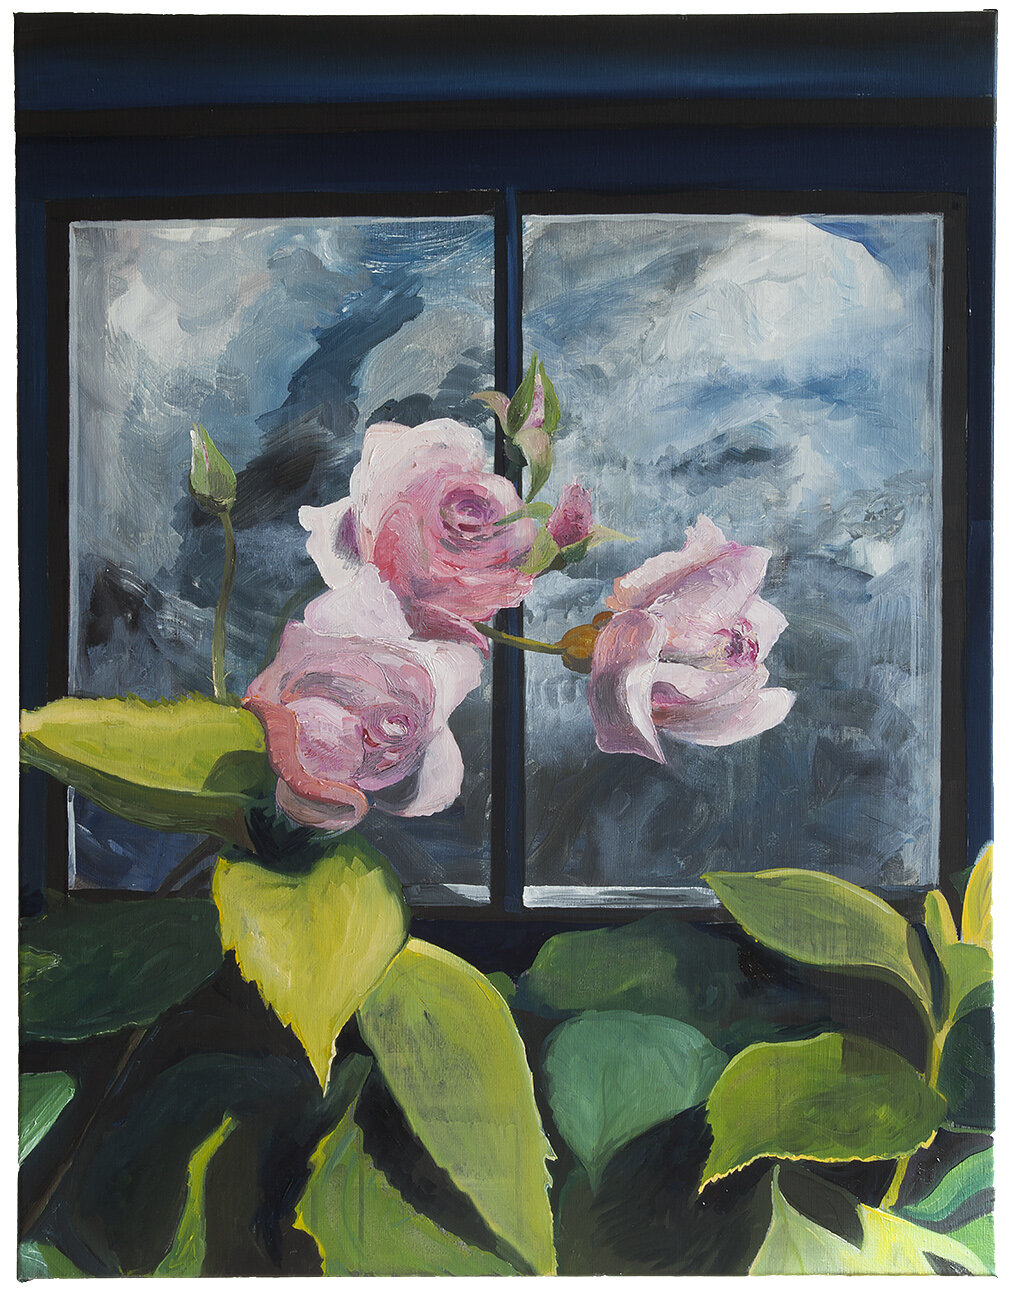  ‘Pink Roses Moody Sky’ 2019, Oil on canvas, 70x90cm 